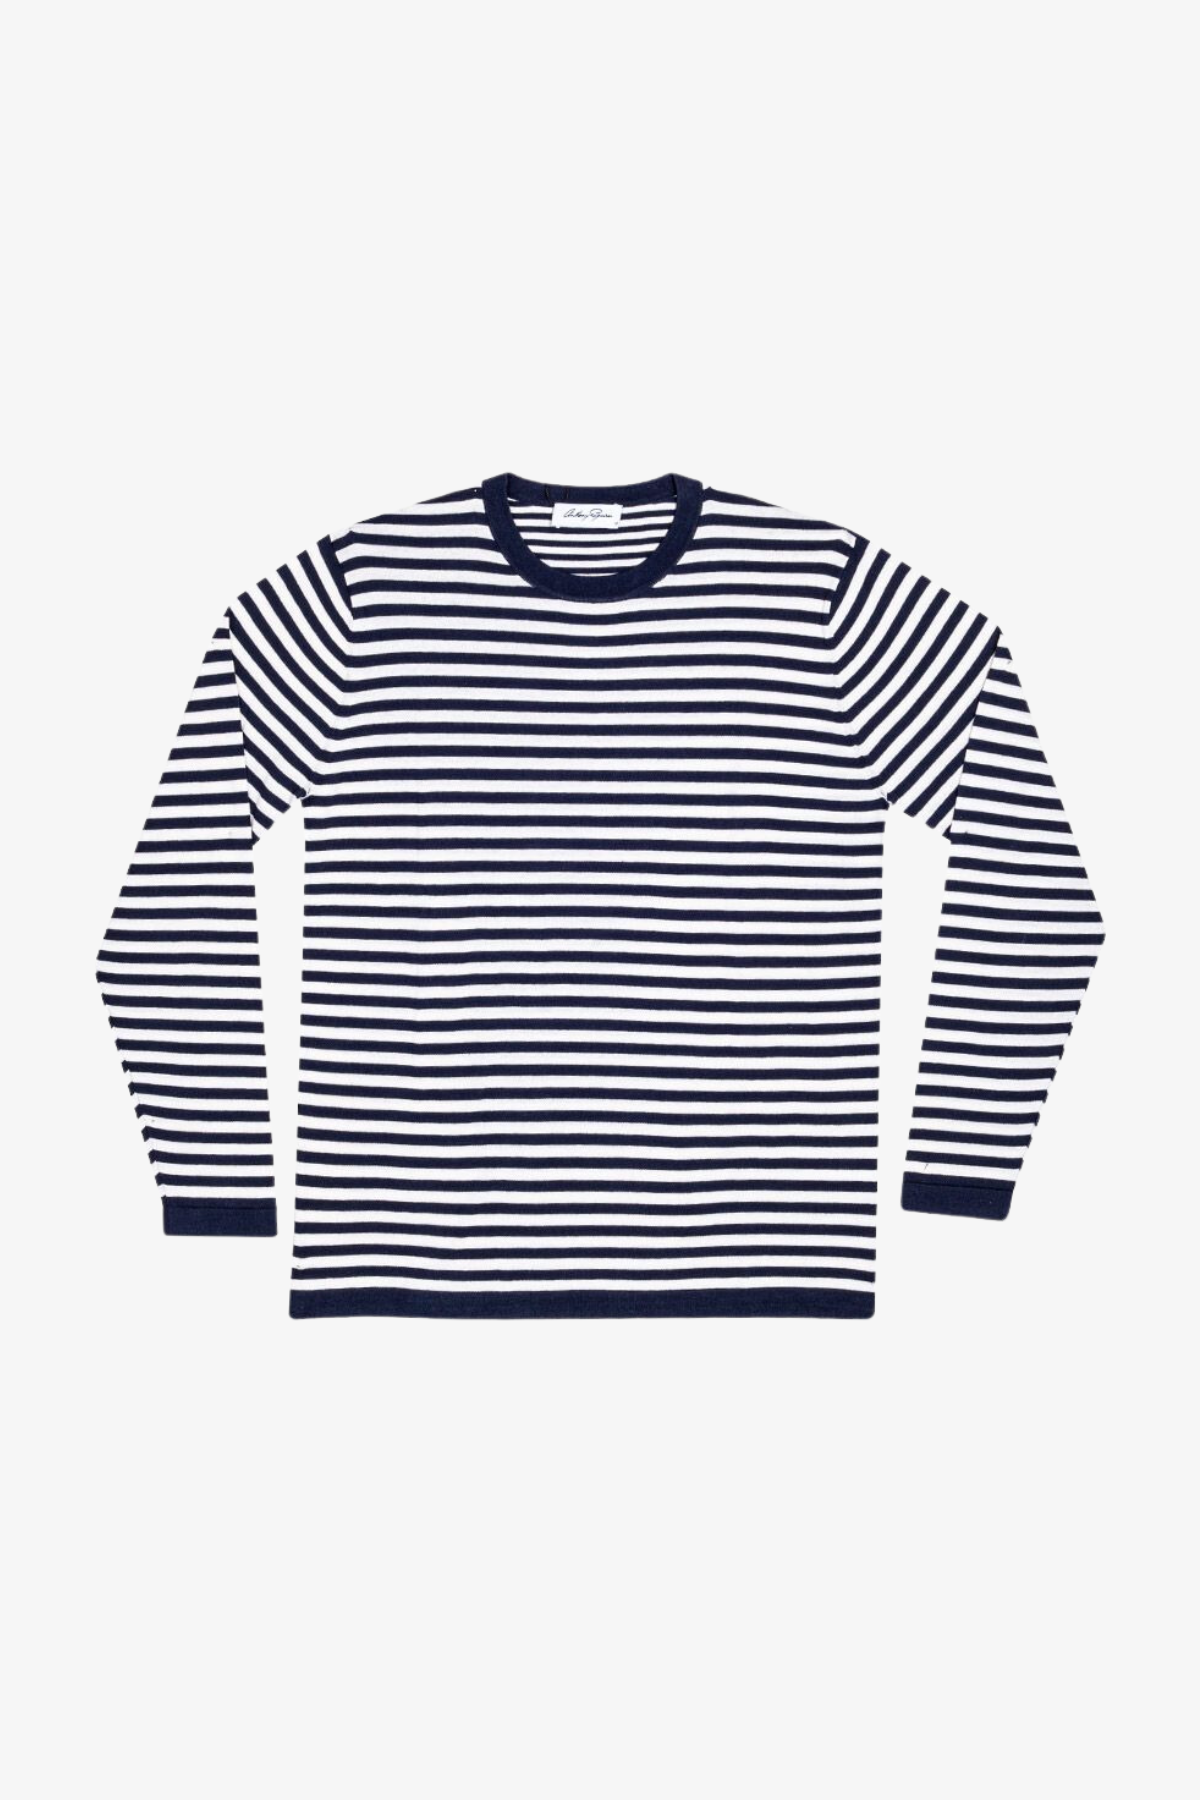 Chance - Navy & White Long Sleeve Knitted T-shirt